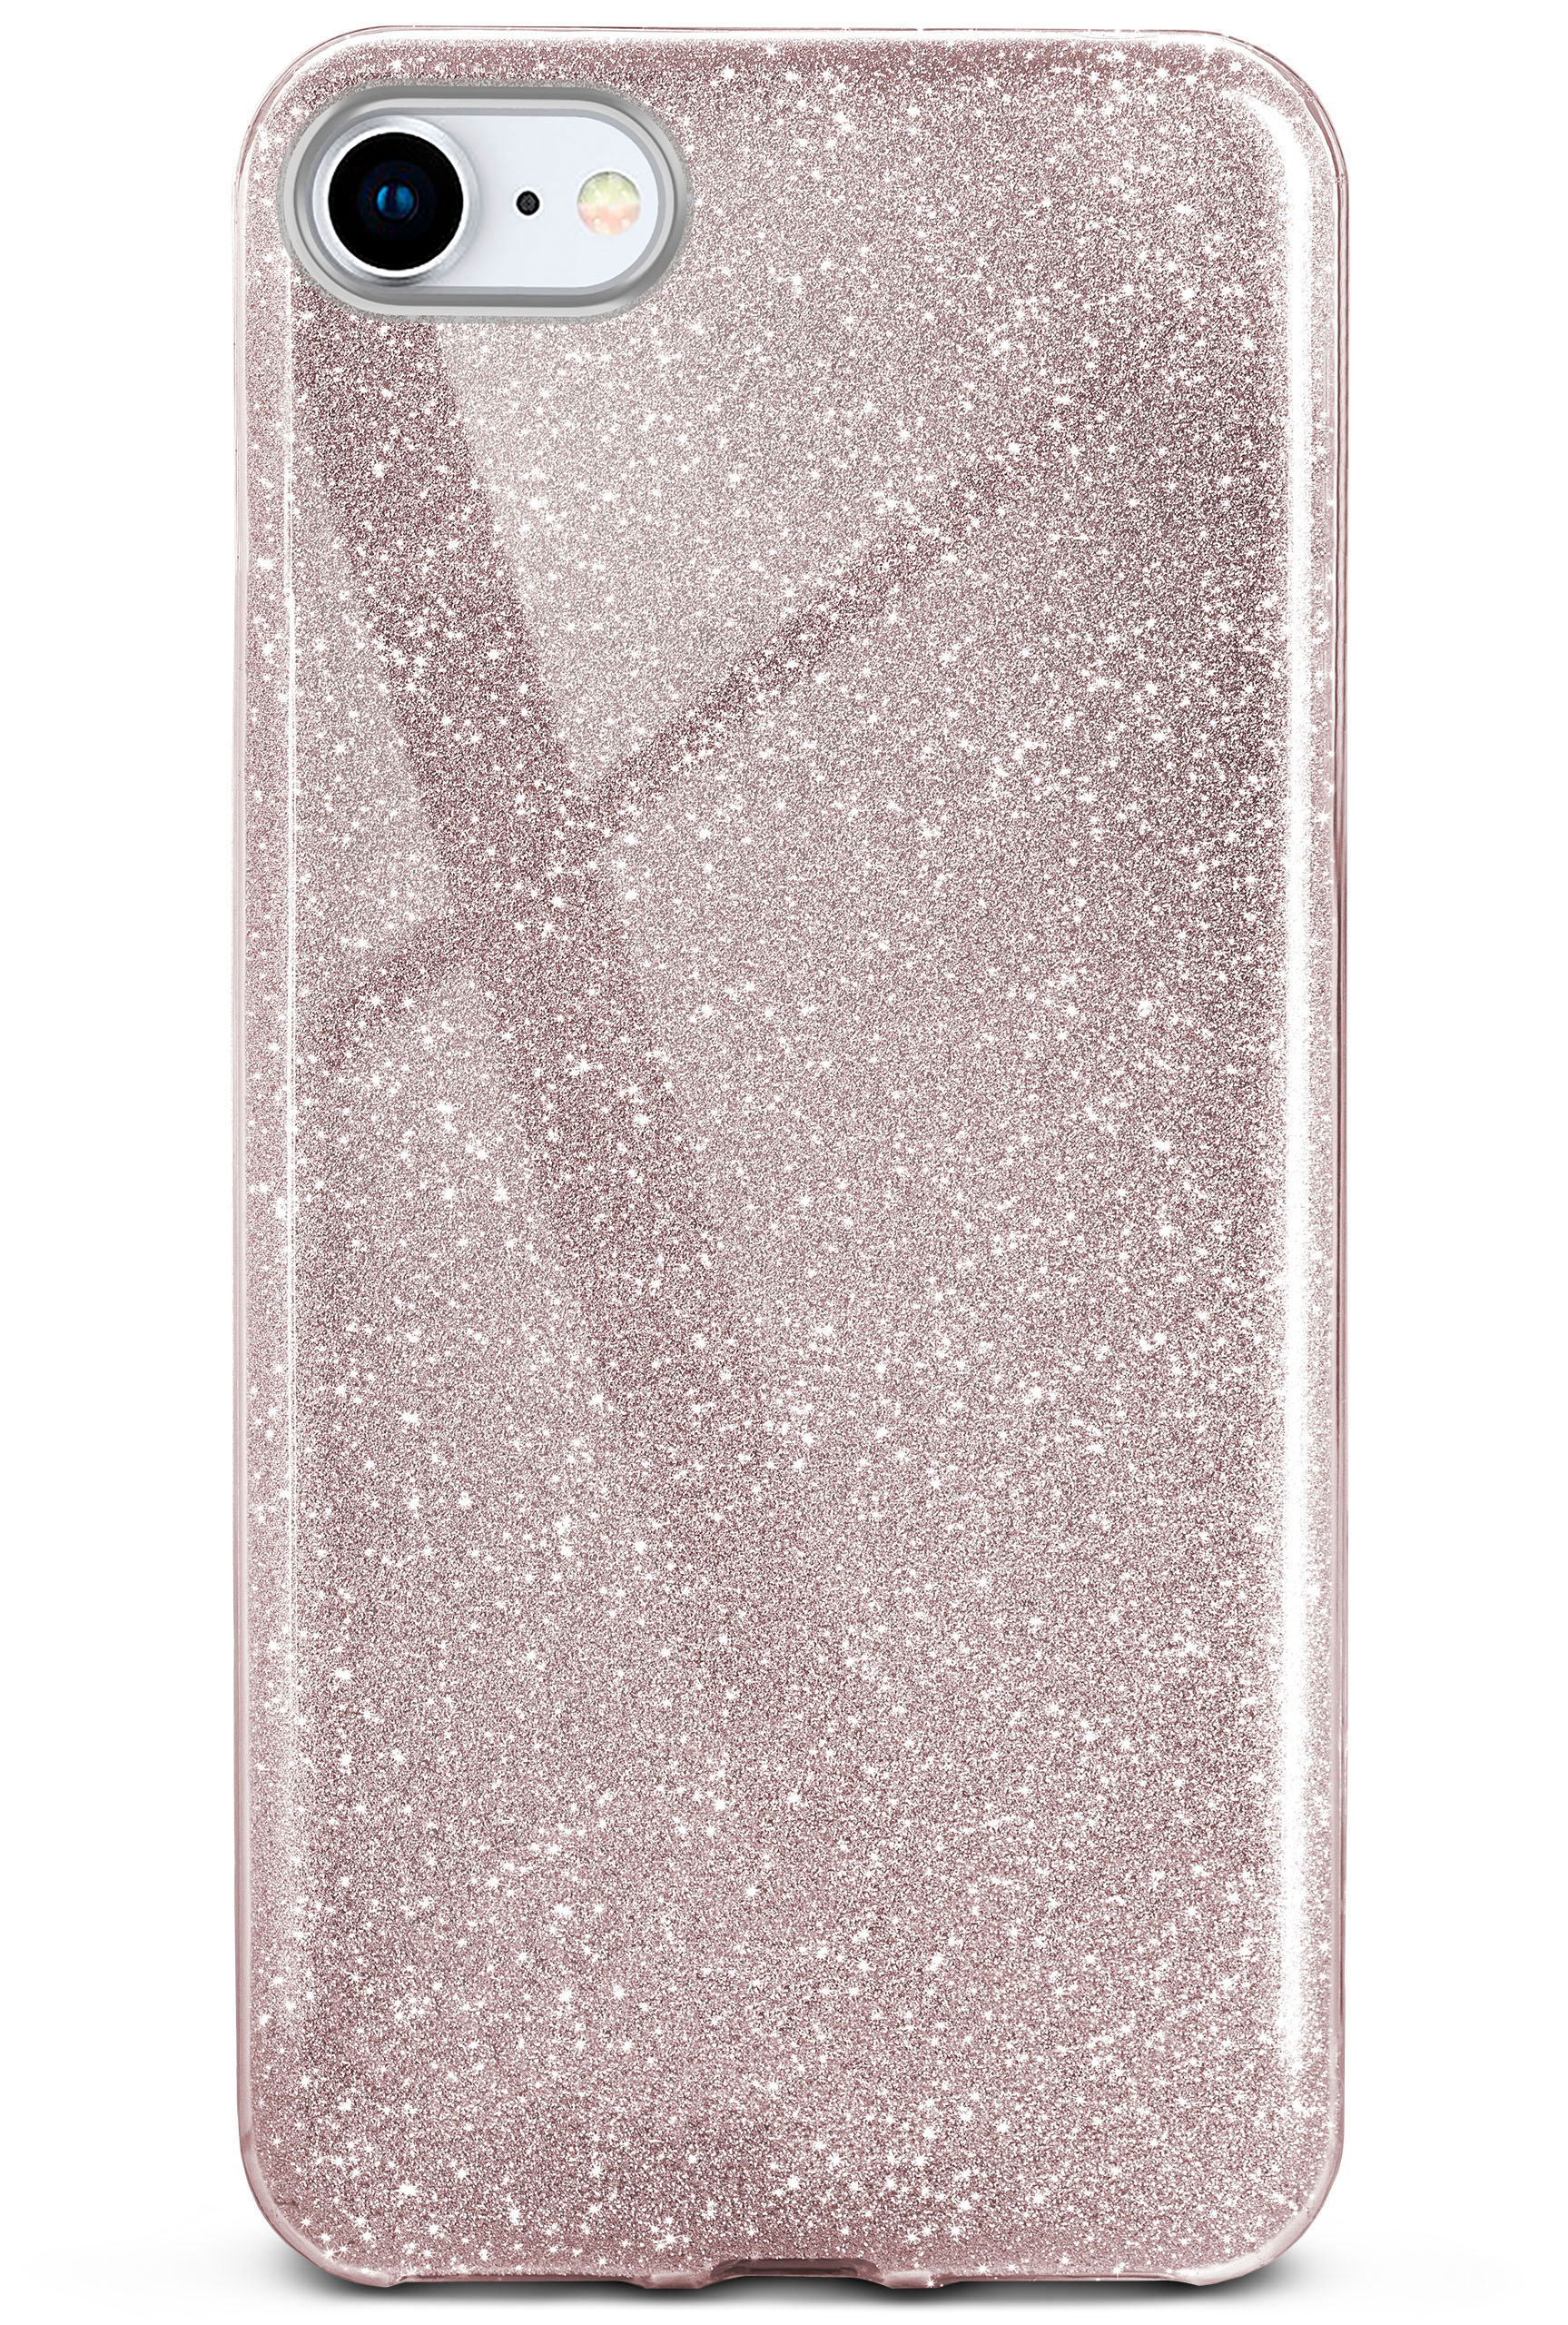 ONEFLOW Rosé Backcover, - Gloss iPhone / iPhone 8, Apple, Case, 7 Glitter